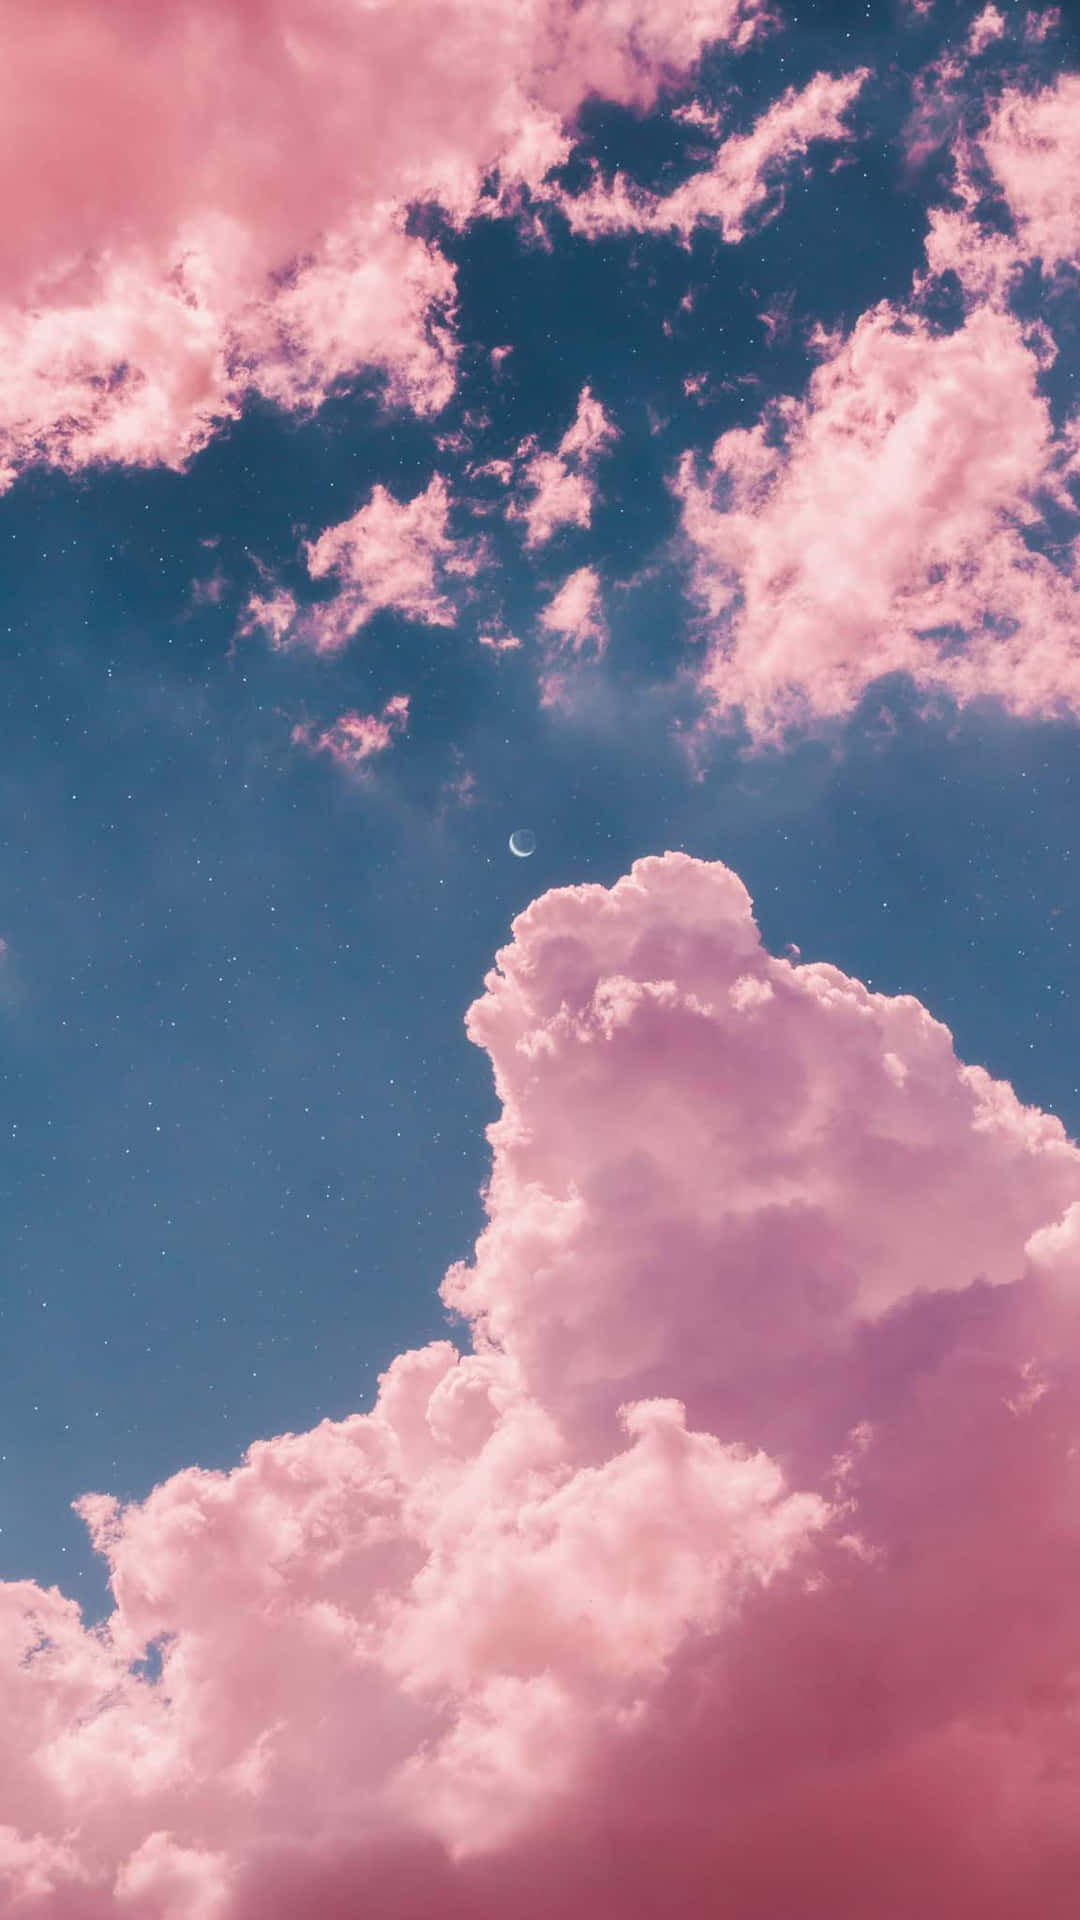 Majestic Pink Cloud Covering Blue-hued Sky